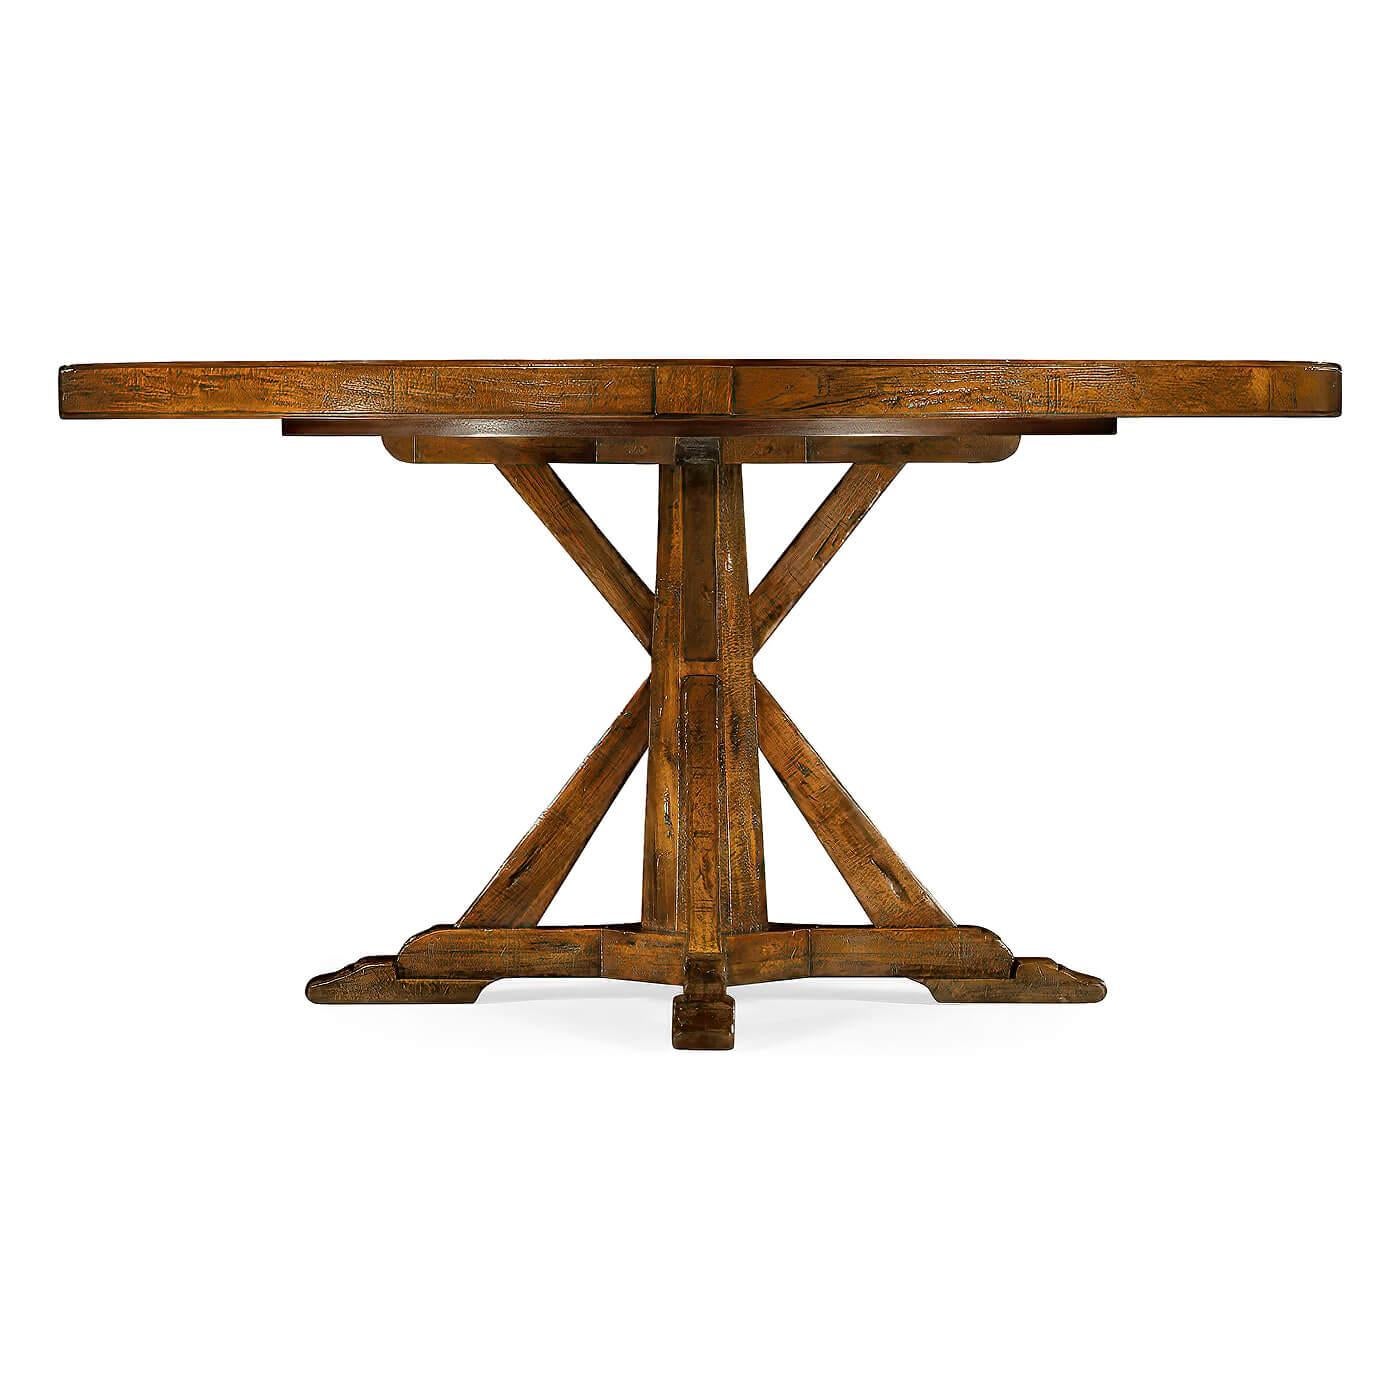 A round dining table finished in a warm walnut color with a rustic finish showing exposed saw marks and set on a bracketed country kitchen base, the table also has a built-in self-storing Lazy Susan.

Dimensions: 60